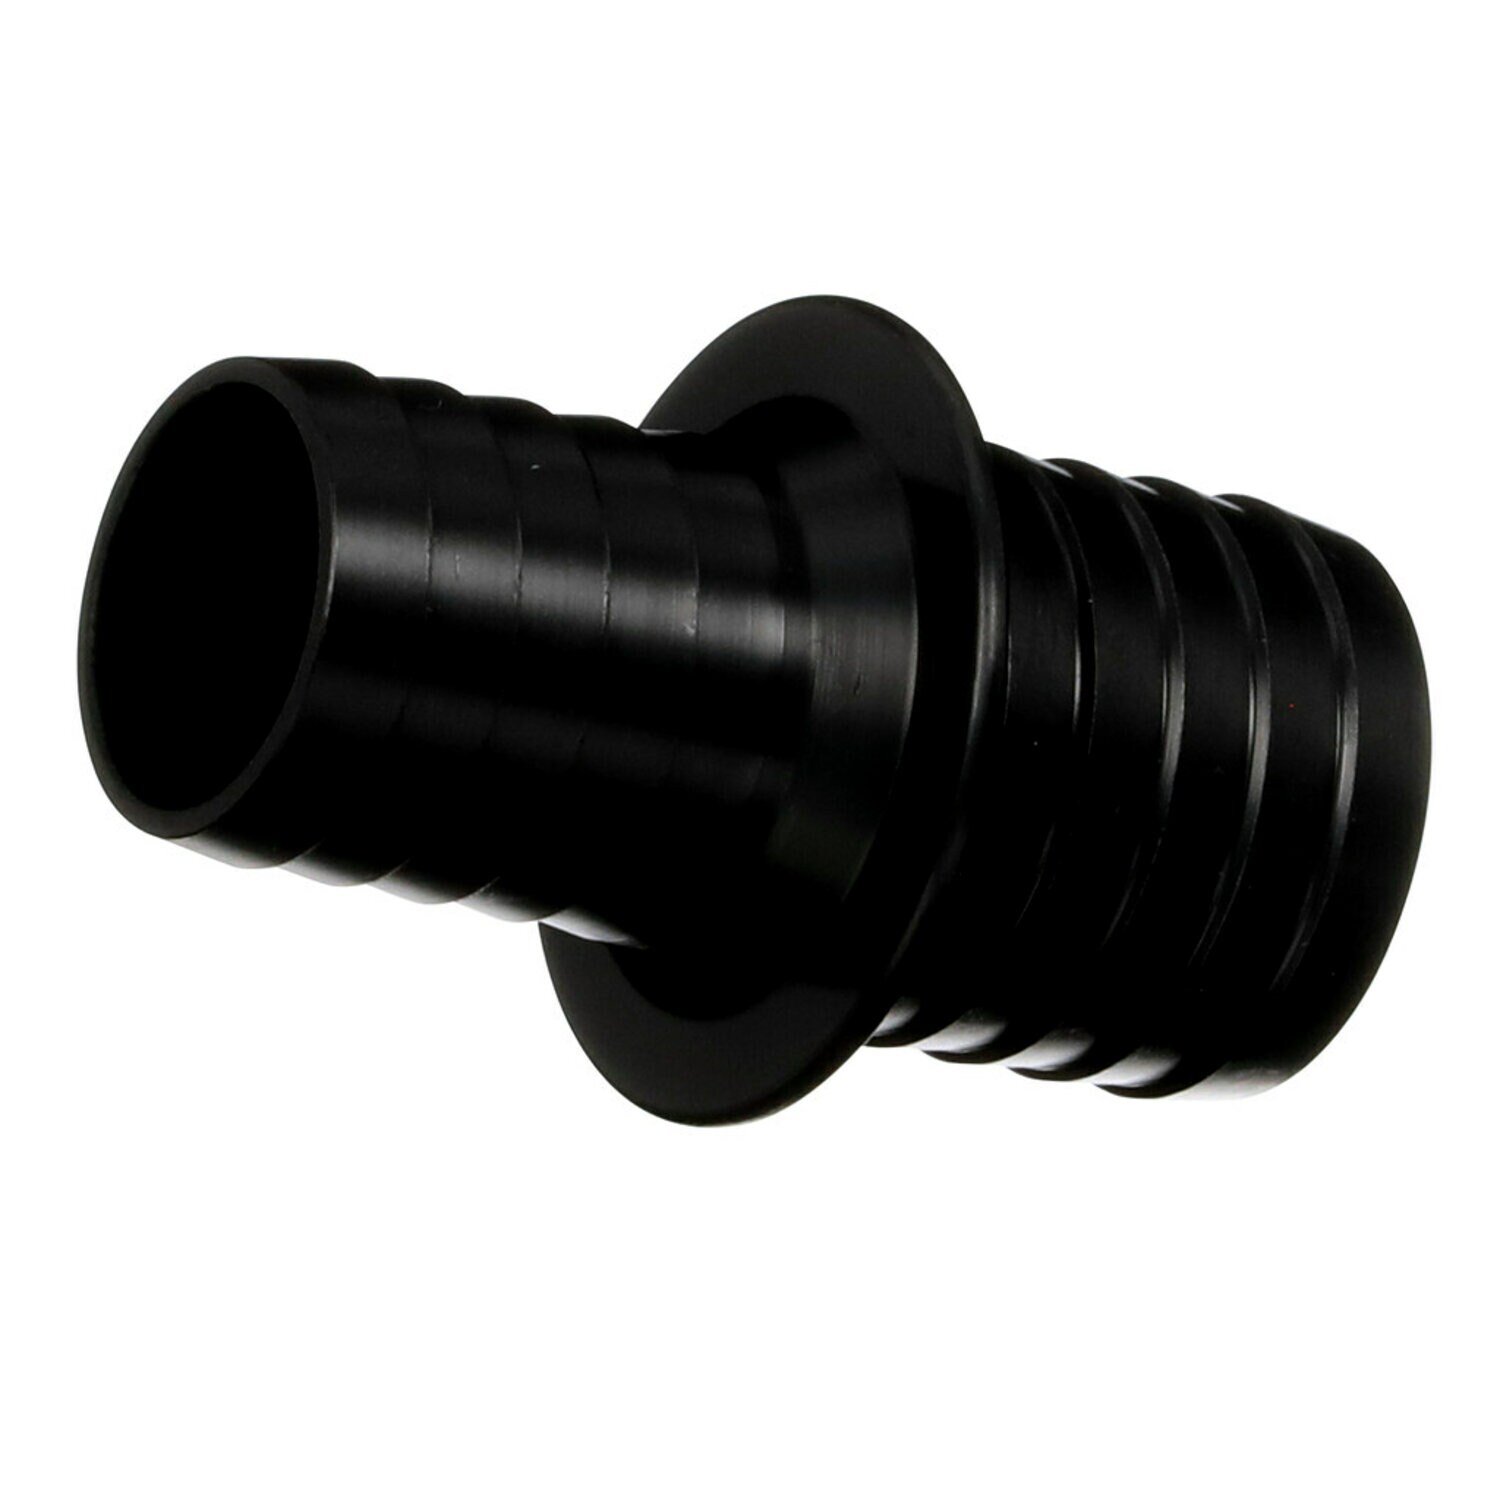 7000045312 - 3M Vacuum Hose Adapter 30441, 1 in ID to 1-1/4 in ID